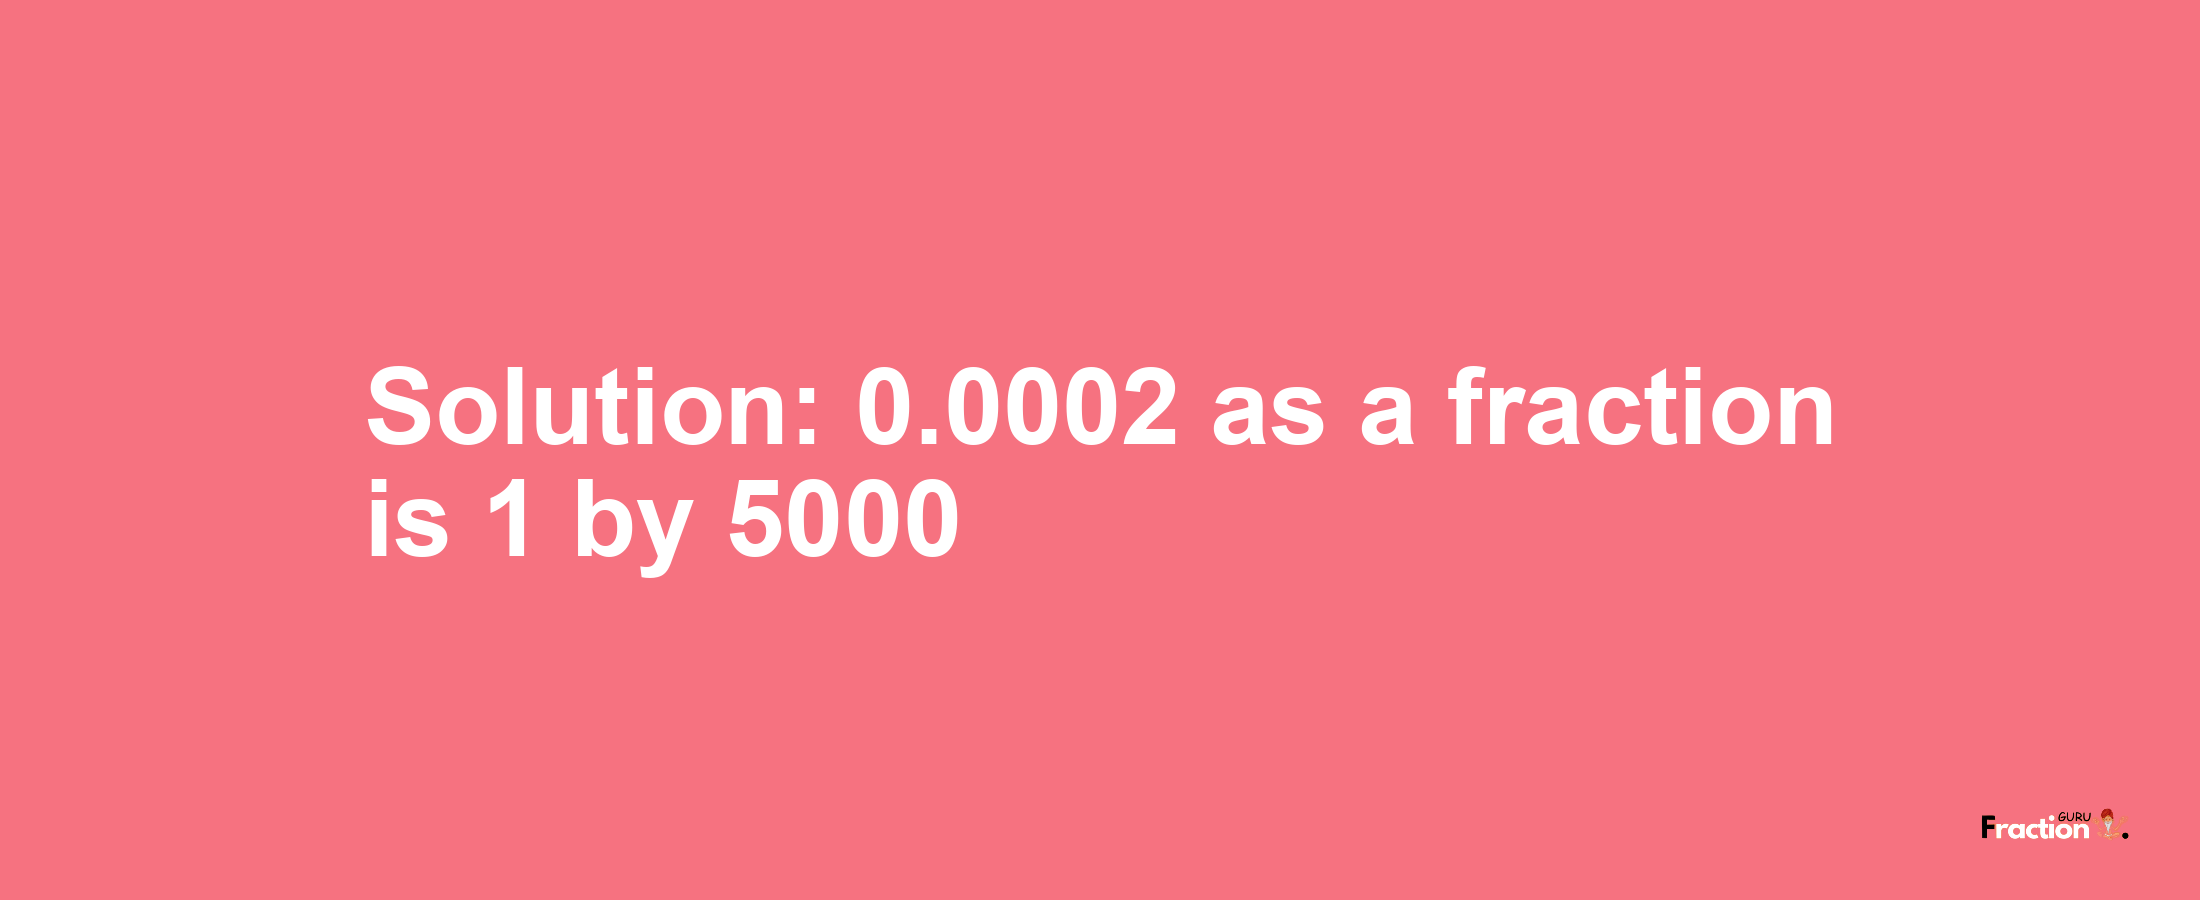 Solution:0.0002 as a fraction is 1/5000